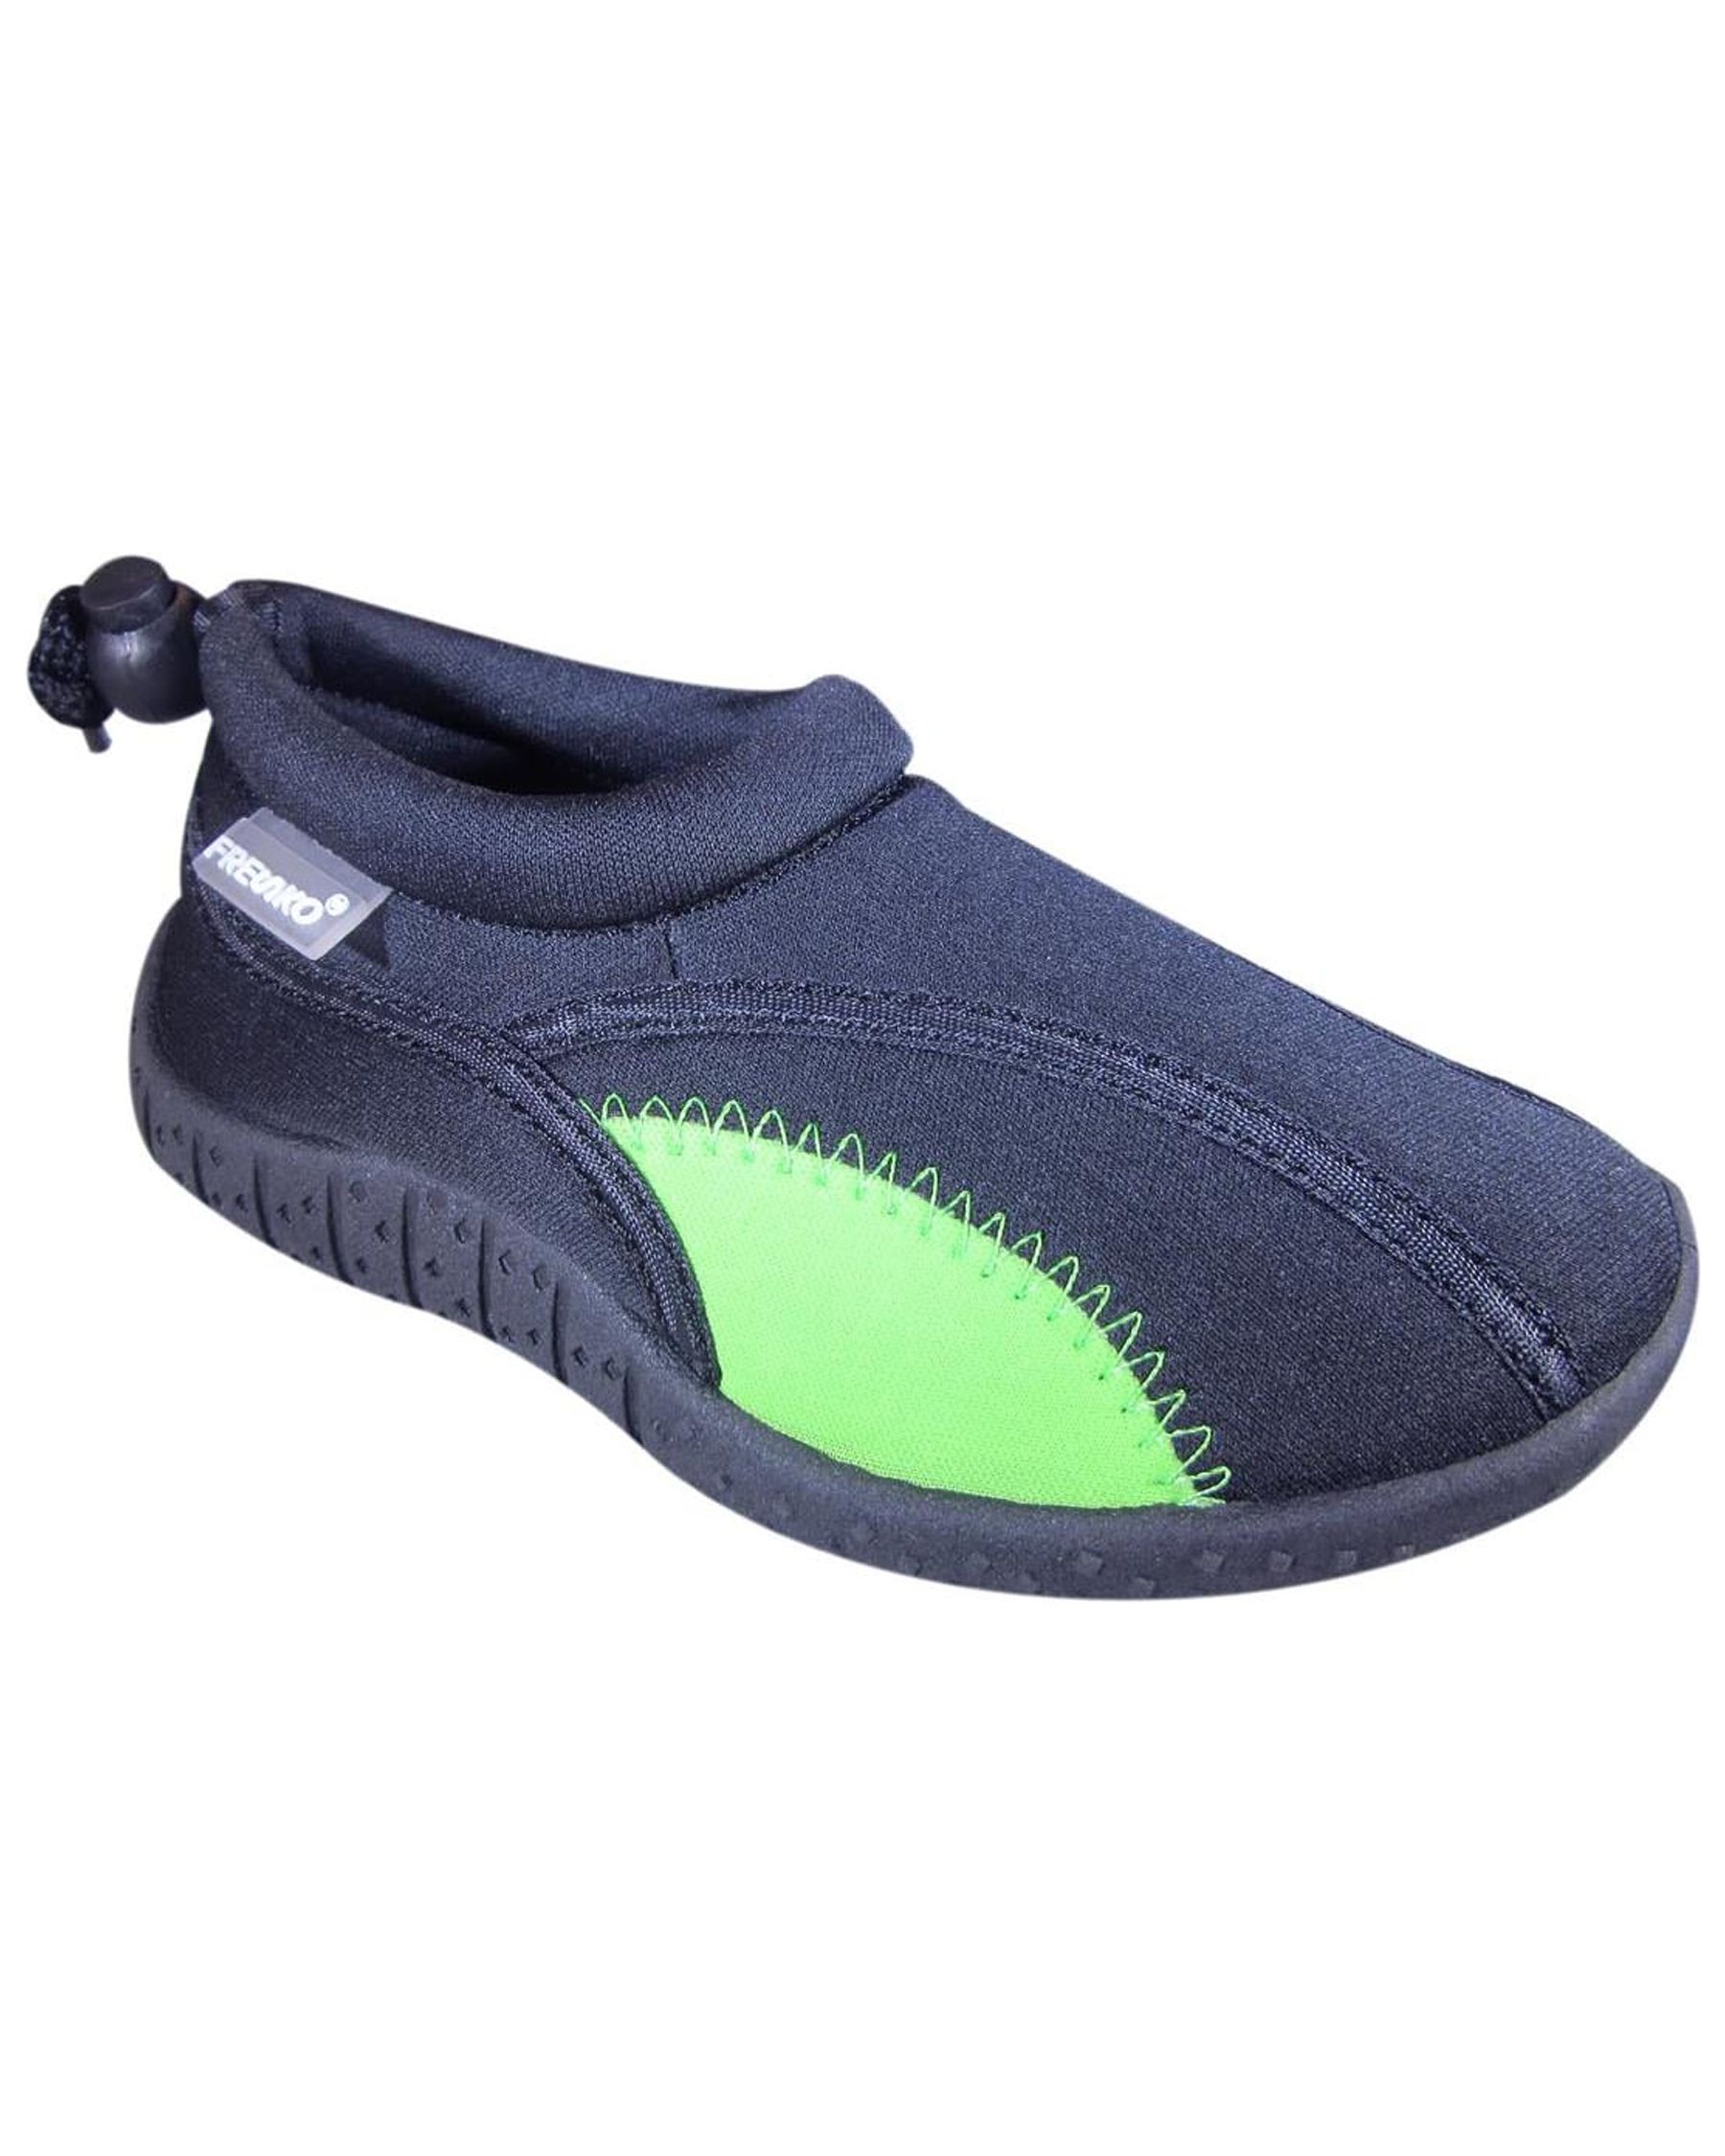 Fresko Toddler and Little Kids Water Shoes for Boys and Girls, Black Lime, Size: 8 Toddler - image 1 of 1